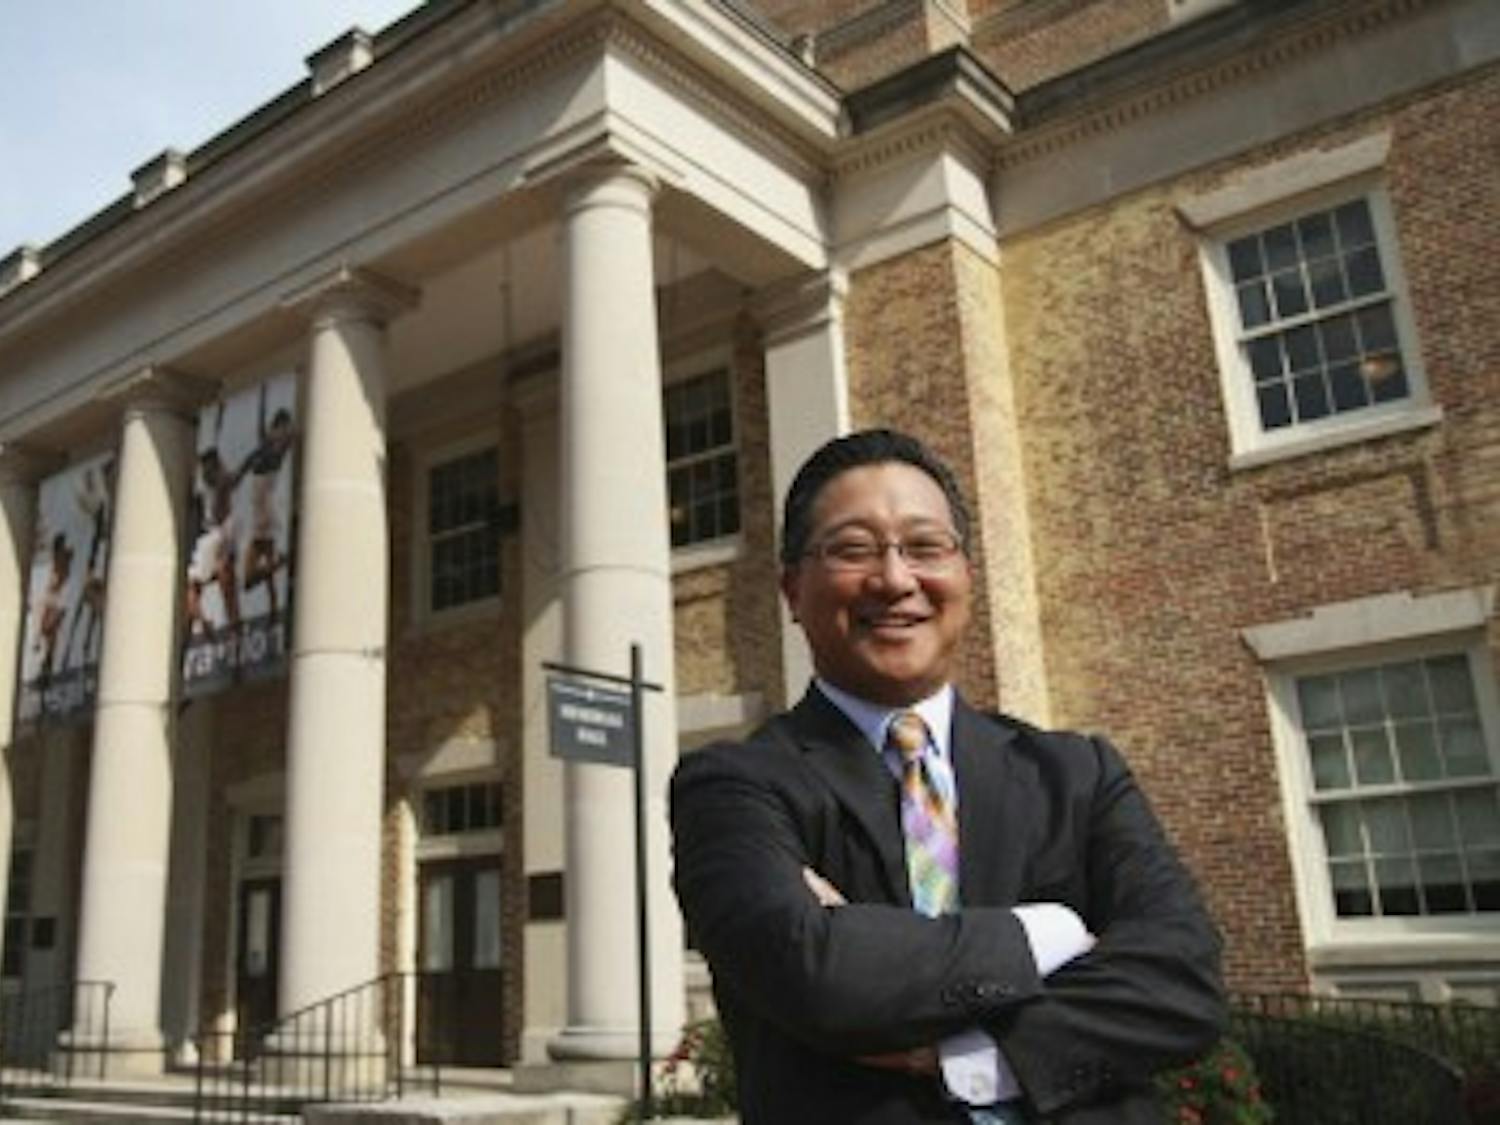 Emil Kang, Carolina’s first Executive Director of the Arts, poses in front of Memorial Hall. Kang has pioneered the univeristy’s recent artistic expansion.